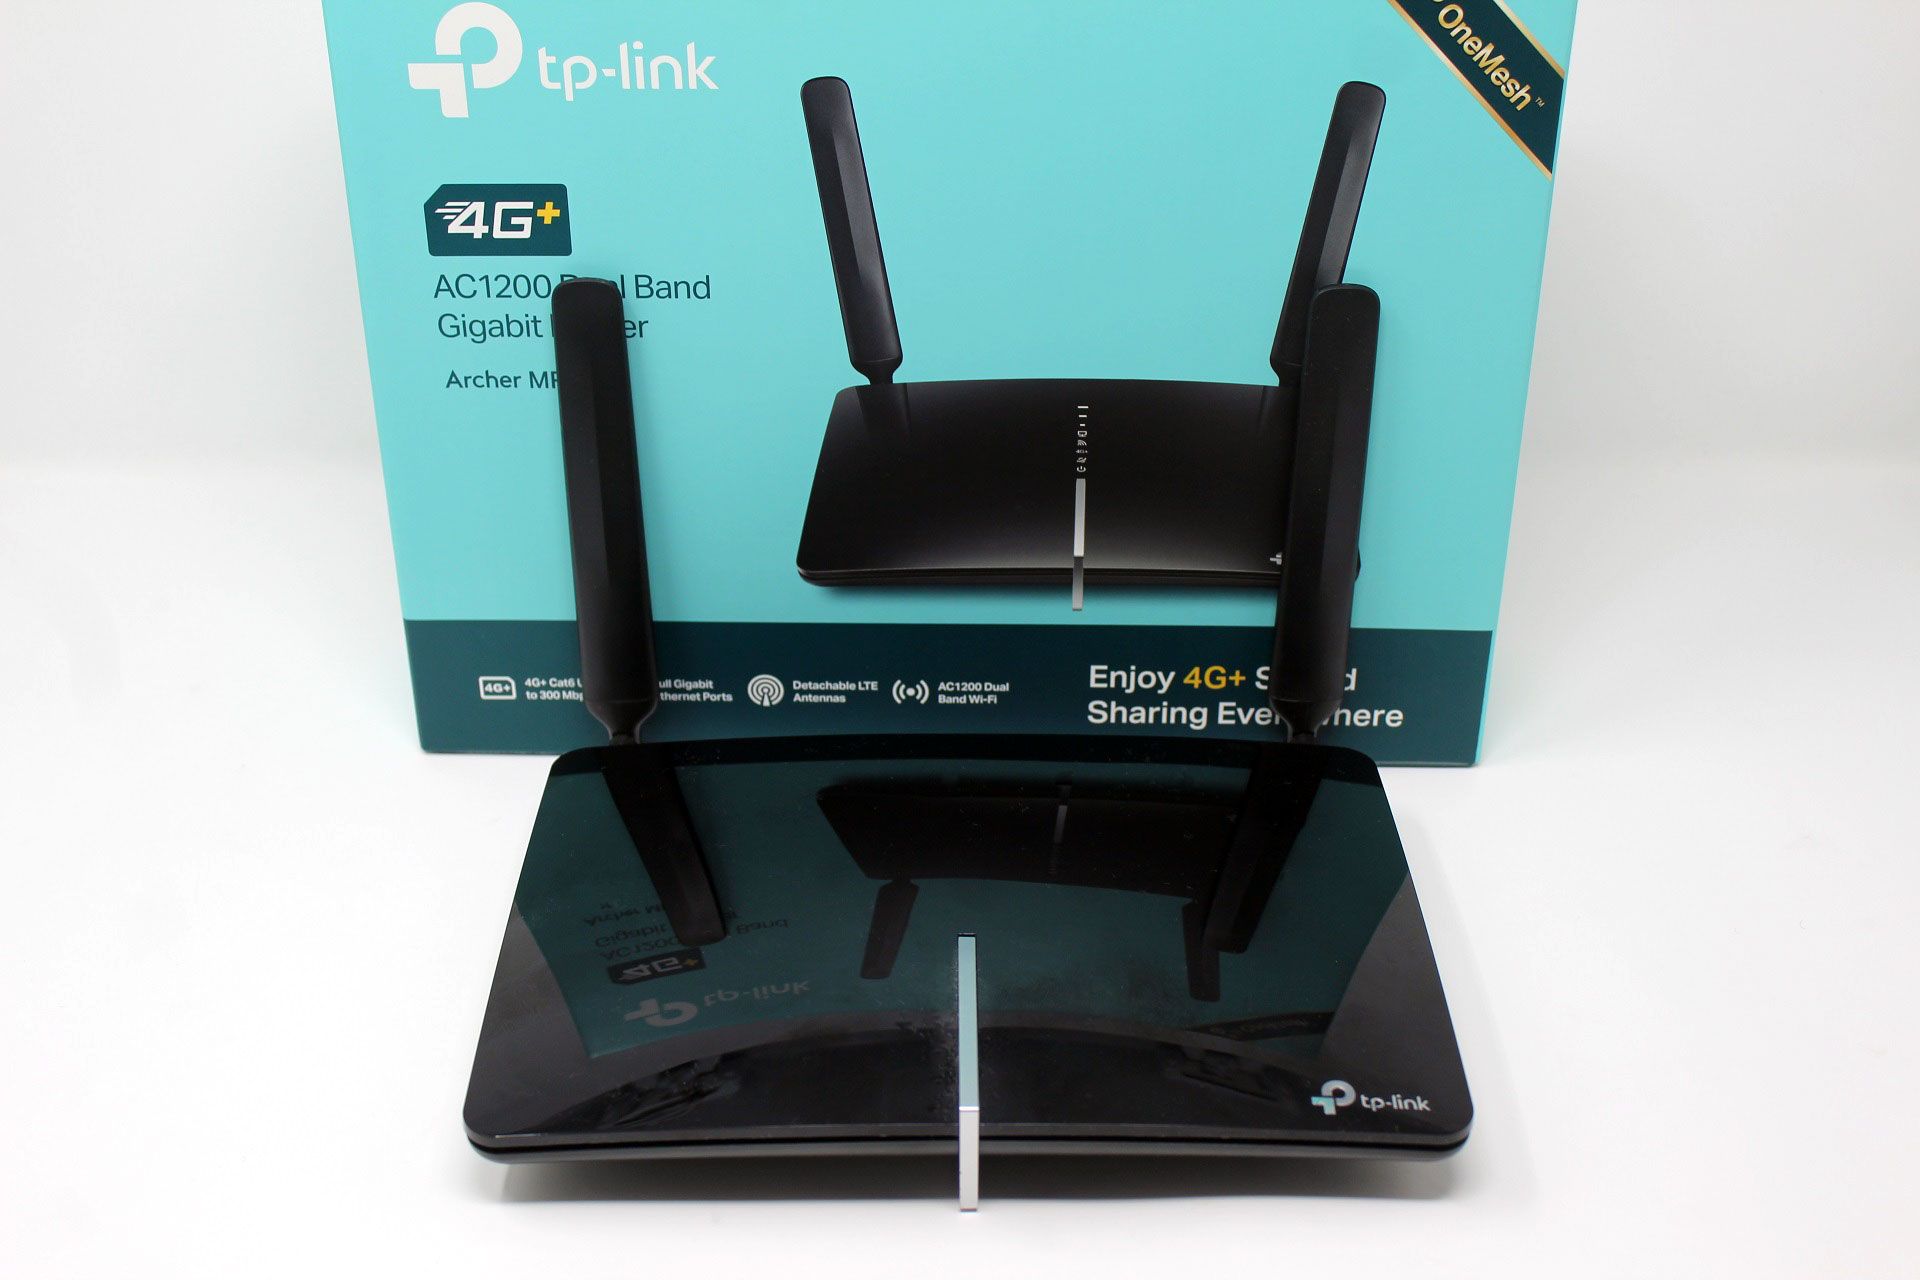 an excellent 4G + router and Wi-Fi